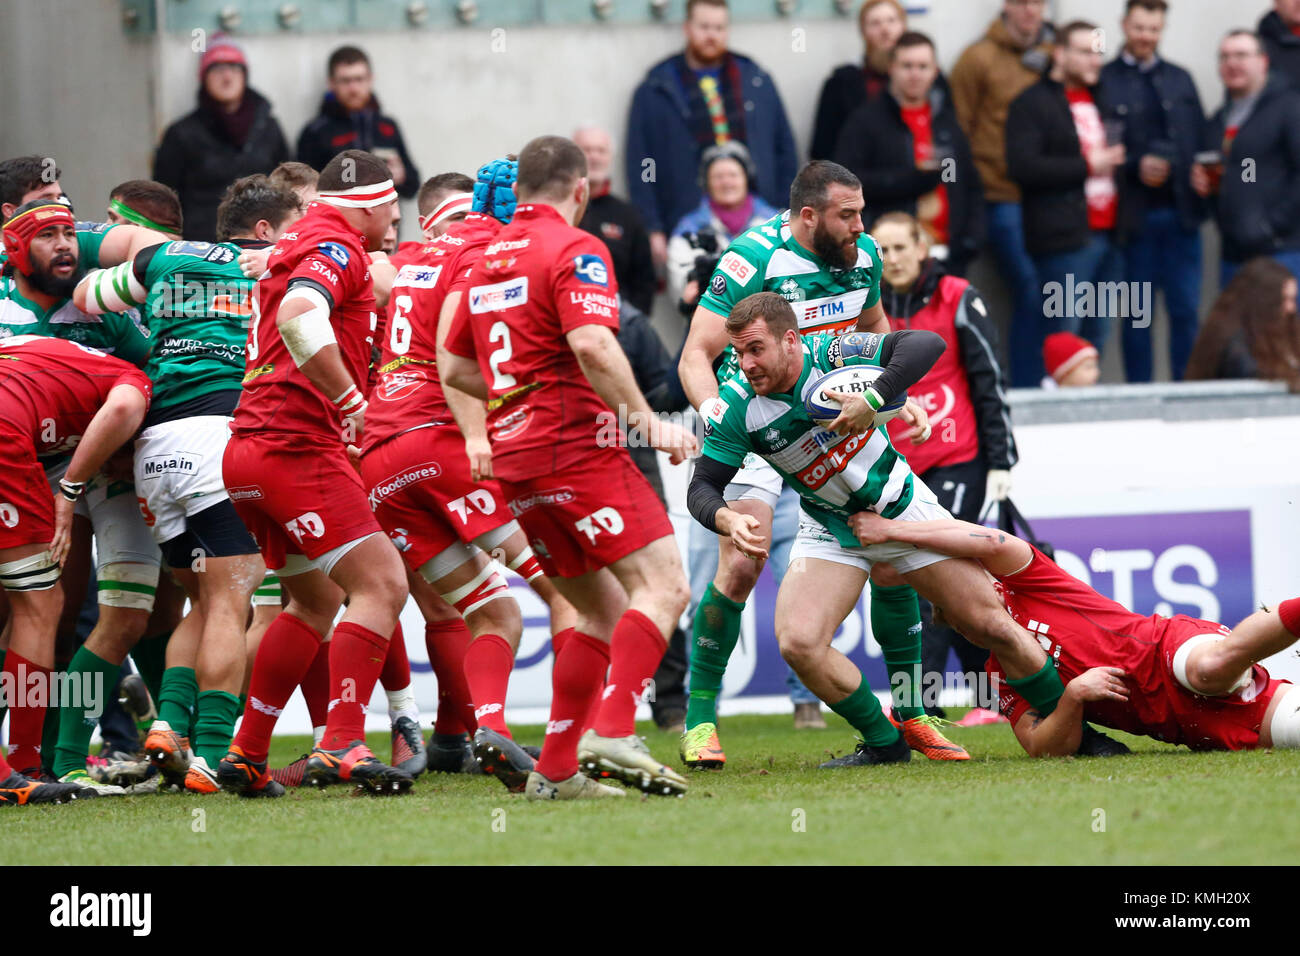 Scarlets/Benetton Rugby in a European Rugby Championship match at Parc y Scarlets Stock Photo